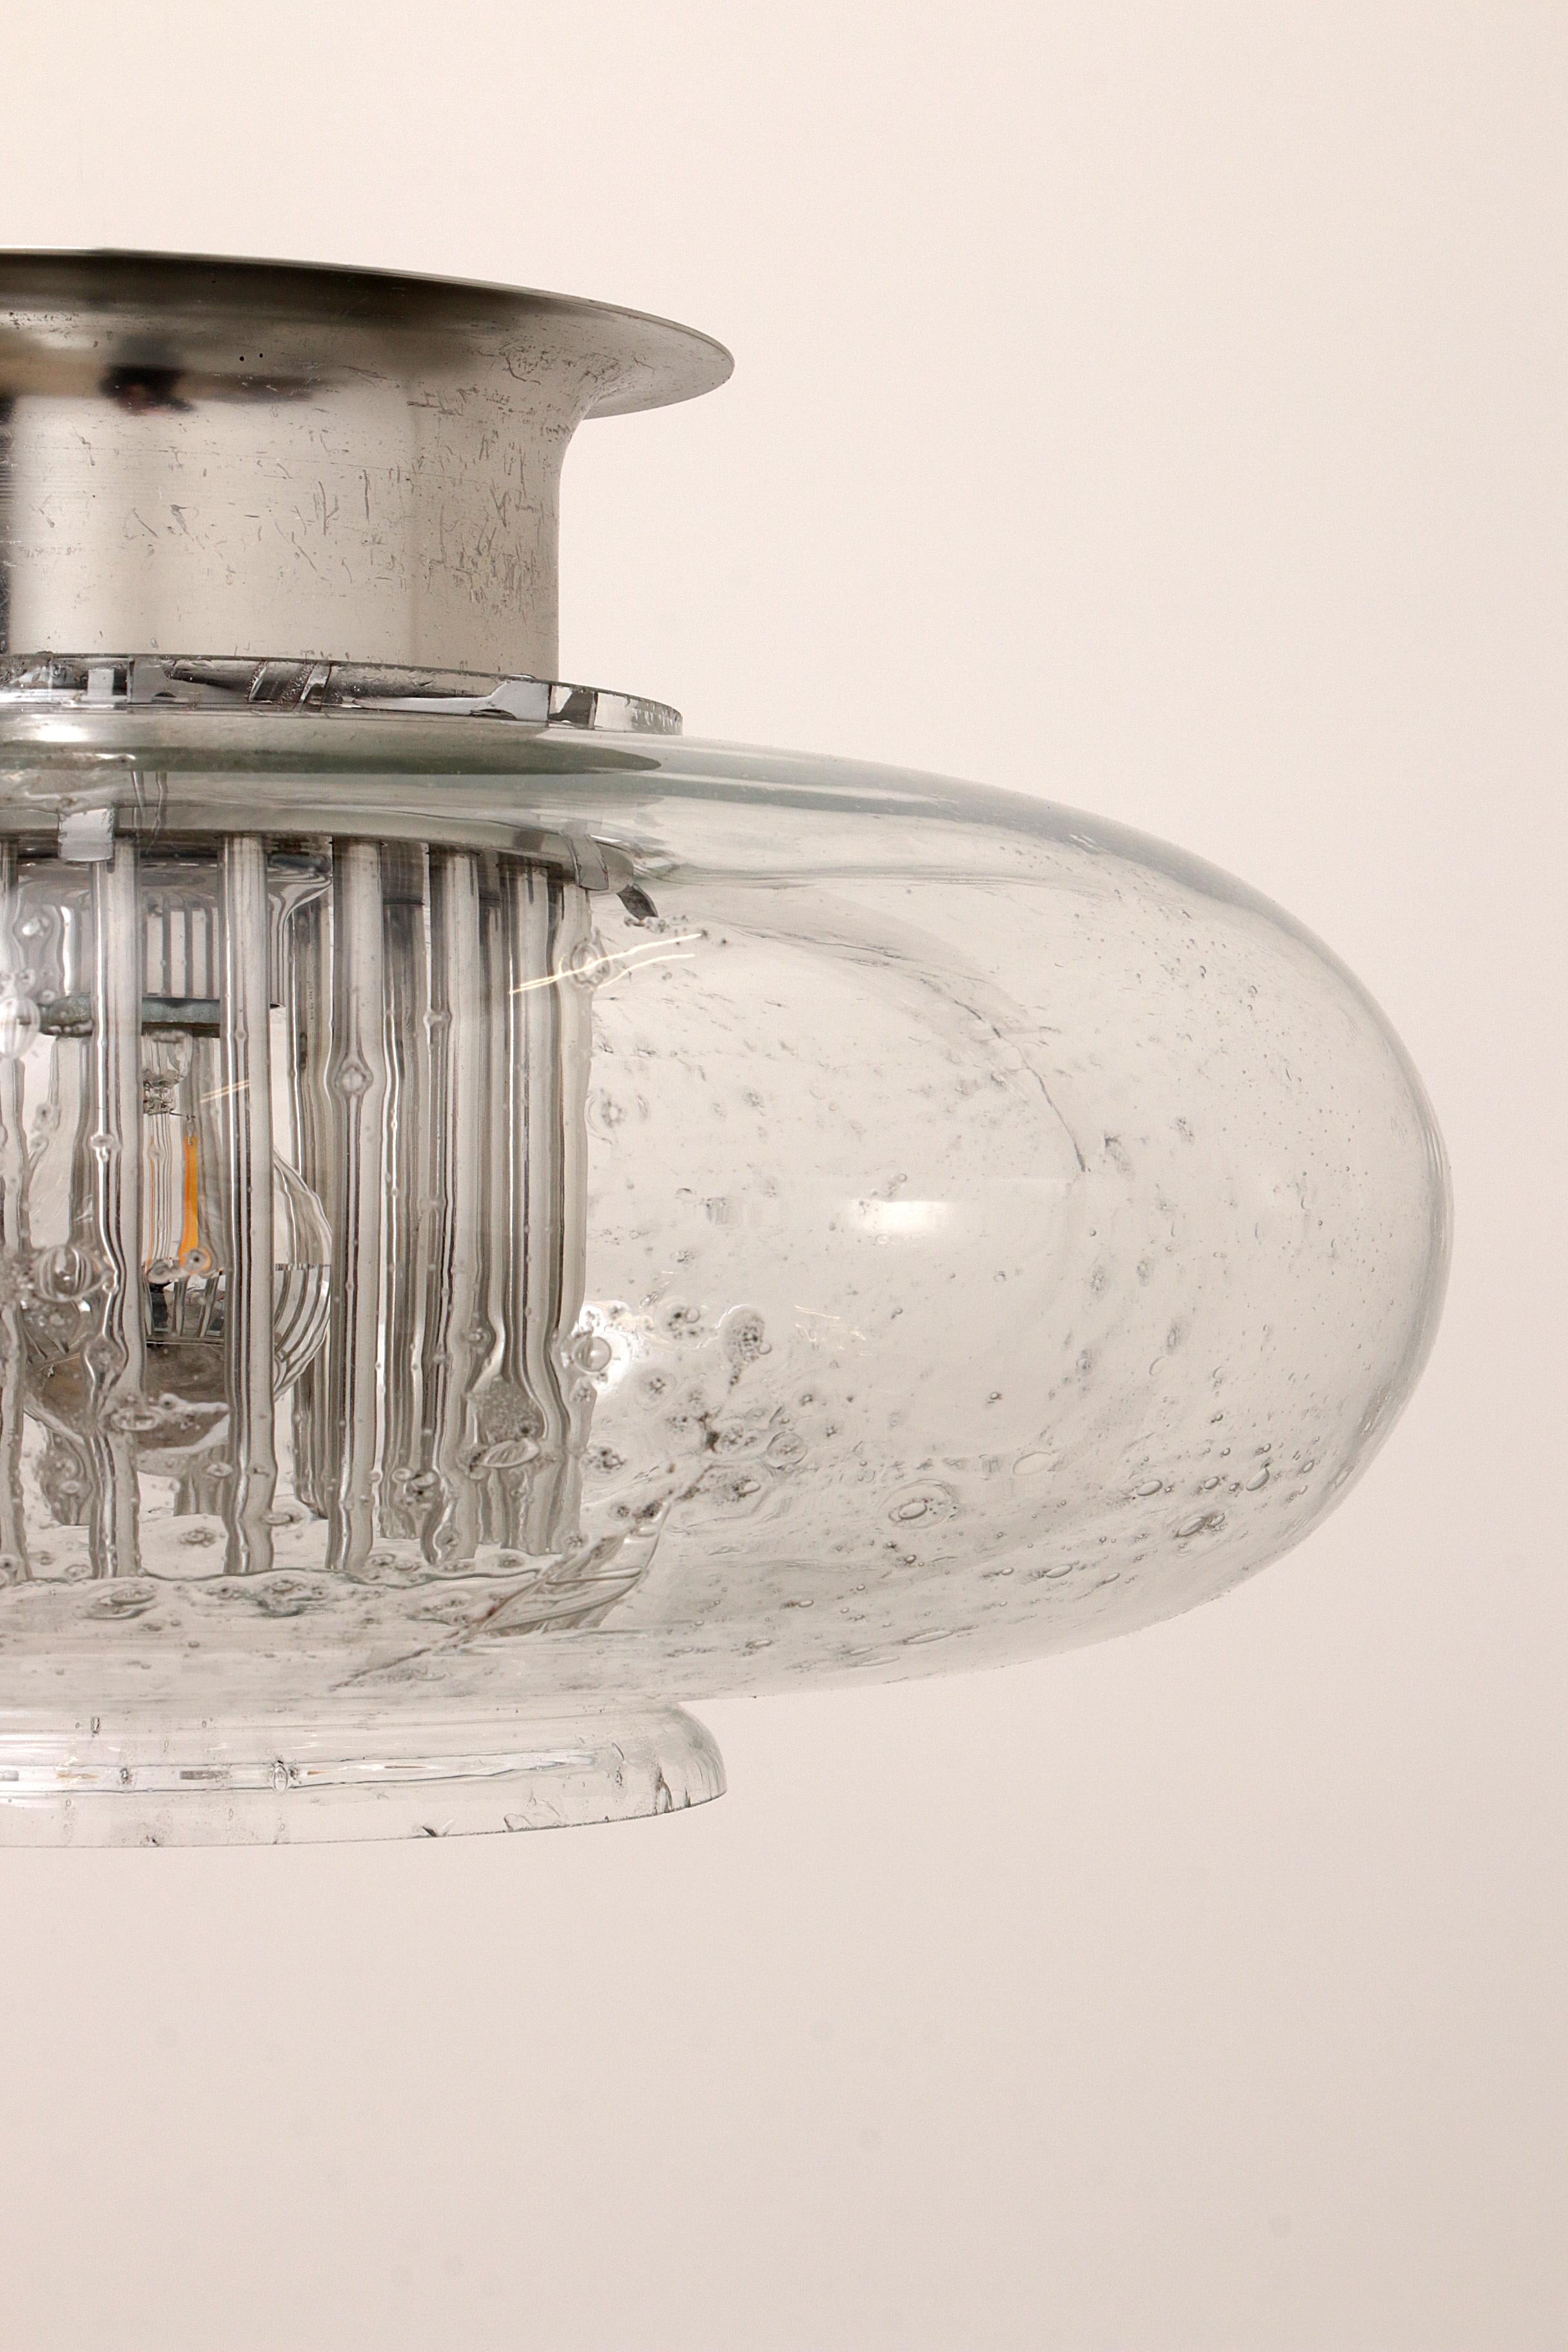 Beautiful Doria Leuchten Ceiling Lamp with Chrome Accents, 1960 Germany 2